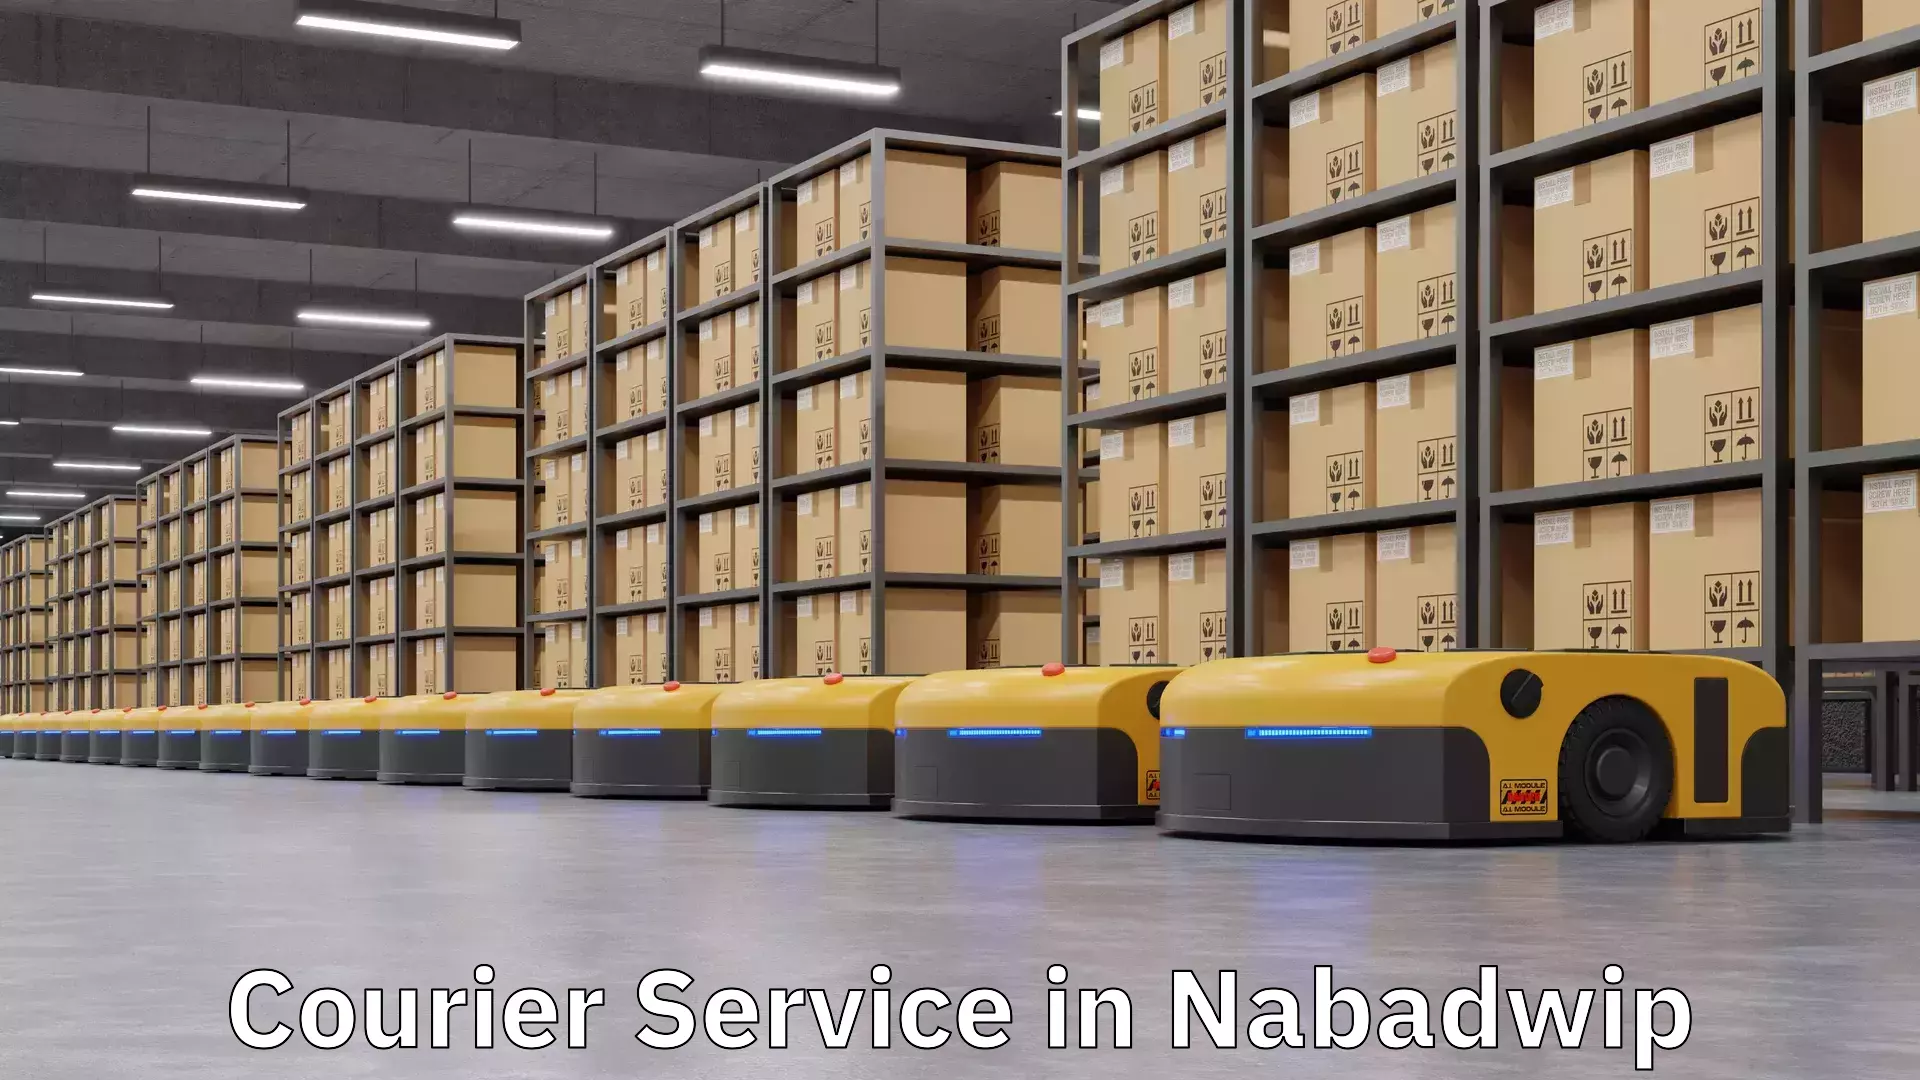 Delivery service partnership in Nabadwip